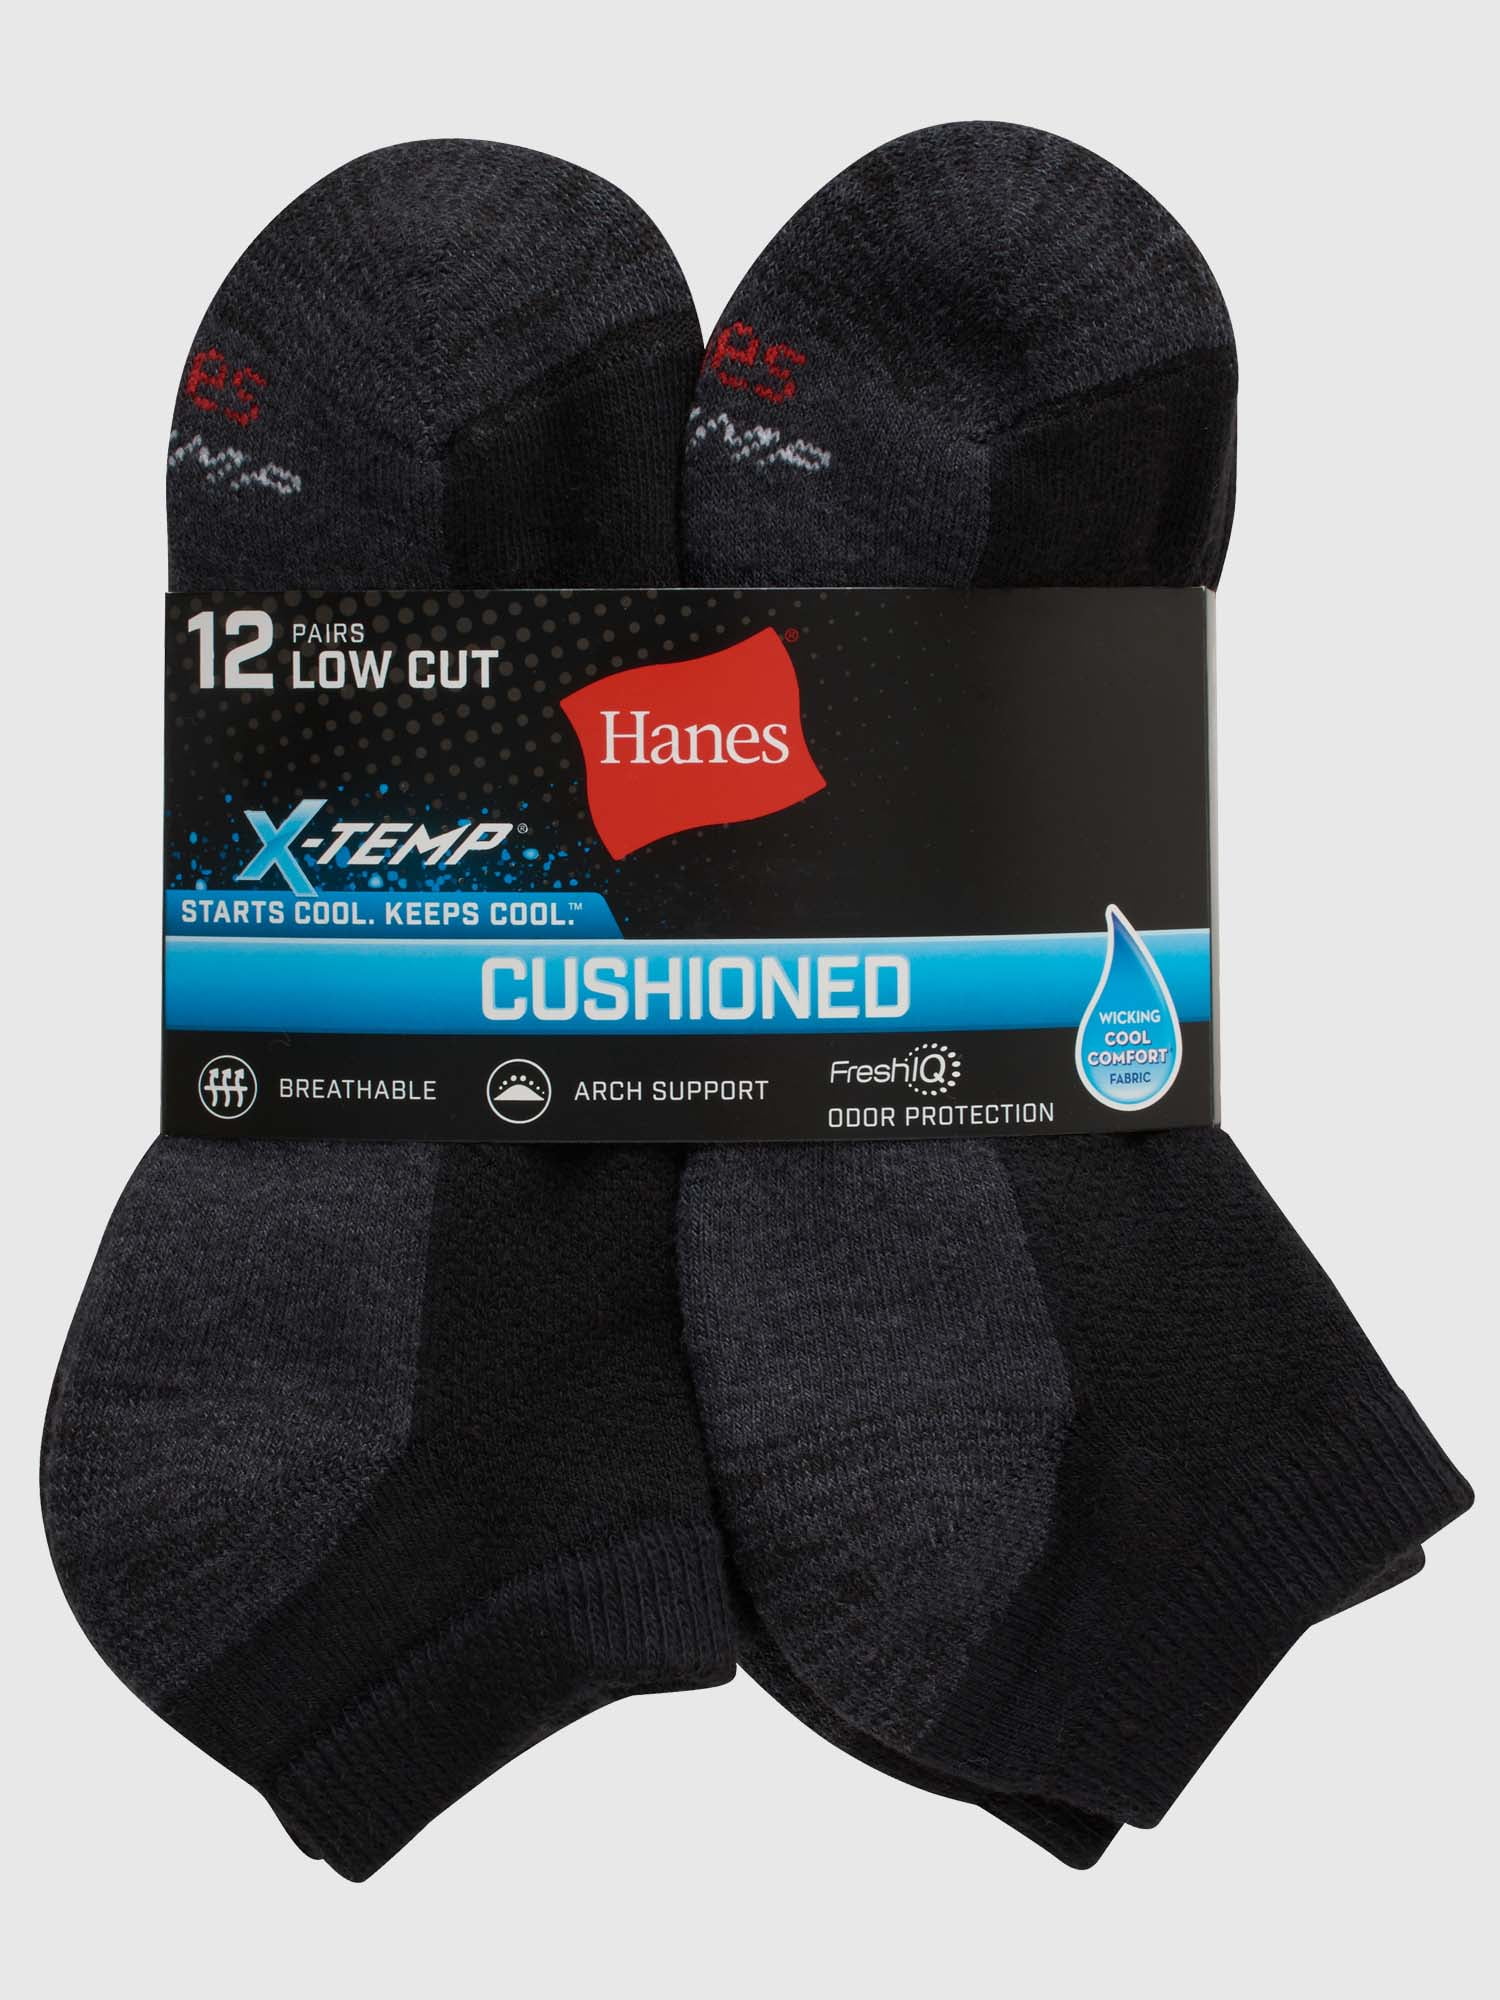 Hanes Men's X-Temp Cushioned with Arch & Vent Low Cut Socks, 12